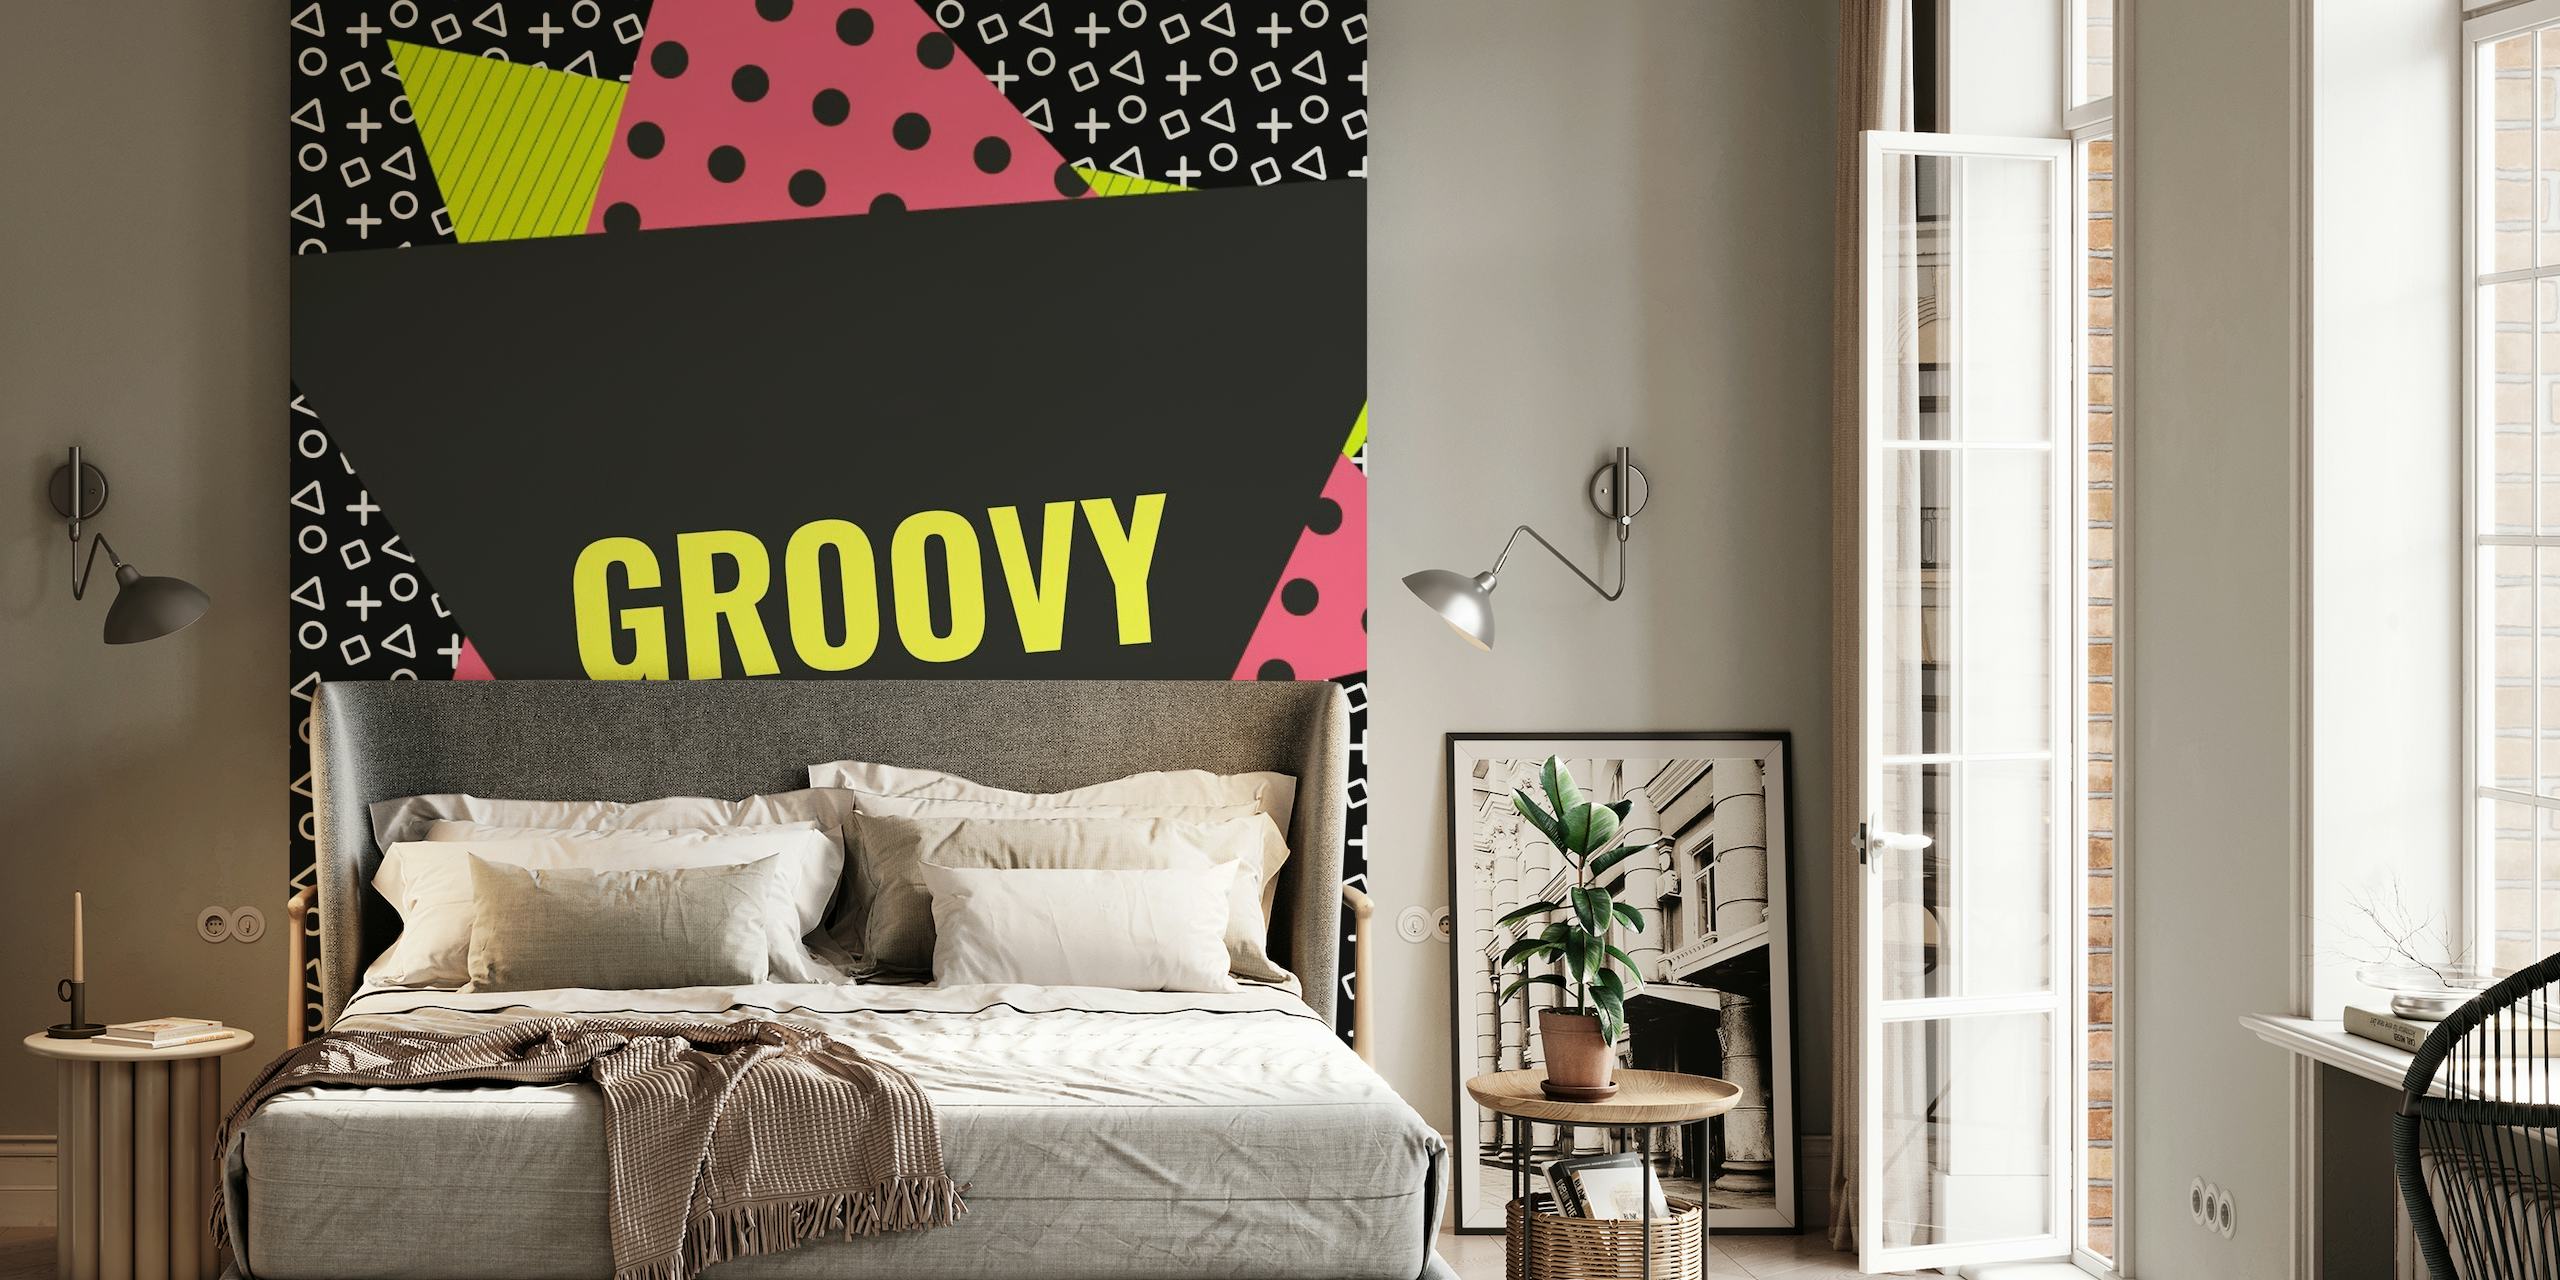 Memphis Style Geometric wall mural with 'Groovy' text, abstract shapes and bold colors